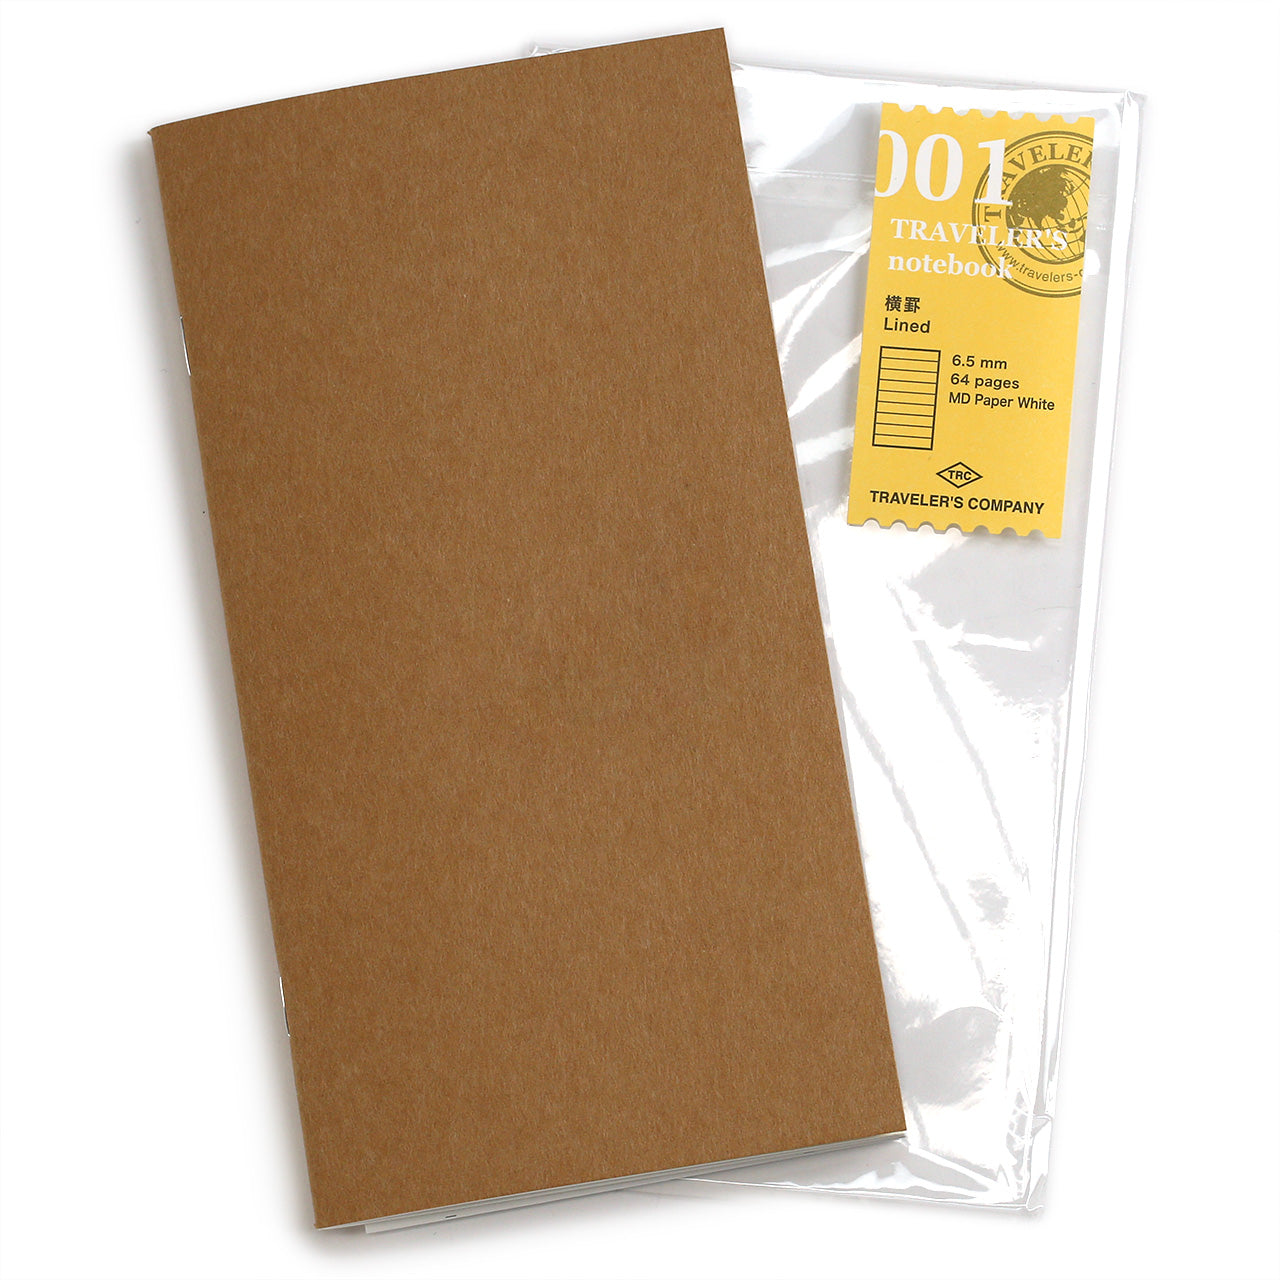 Traveler's notebook 001 lined MD paper refill, showing the kraft cover and the yellow label